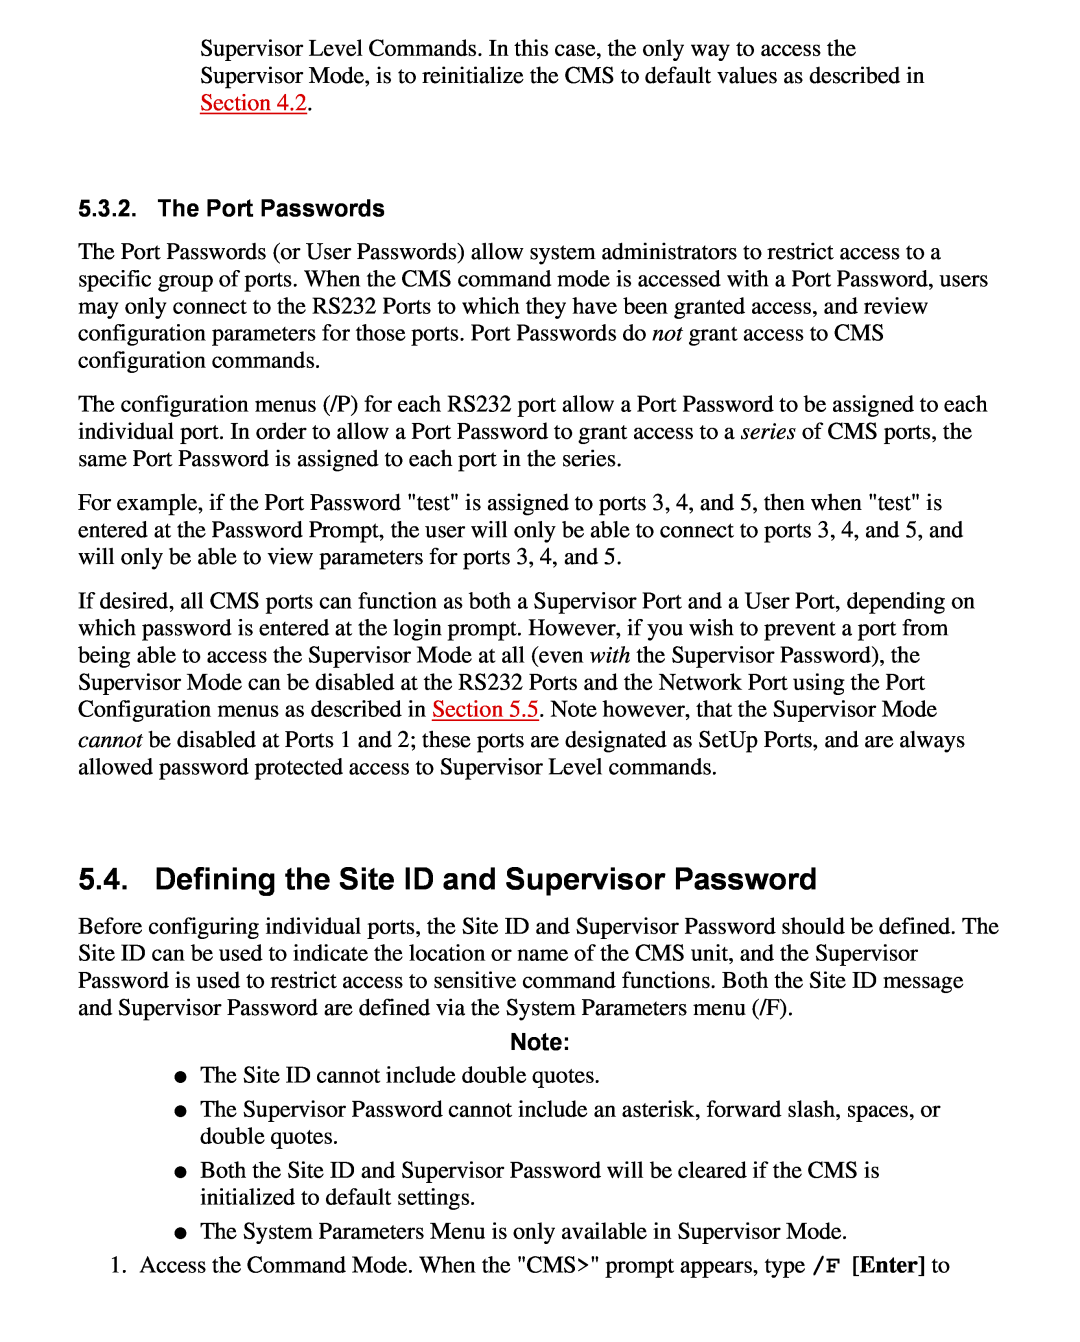 Western Telematic CMS-16 manual Defining the Site ID and Supervisor Password, The Port Passwords 